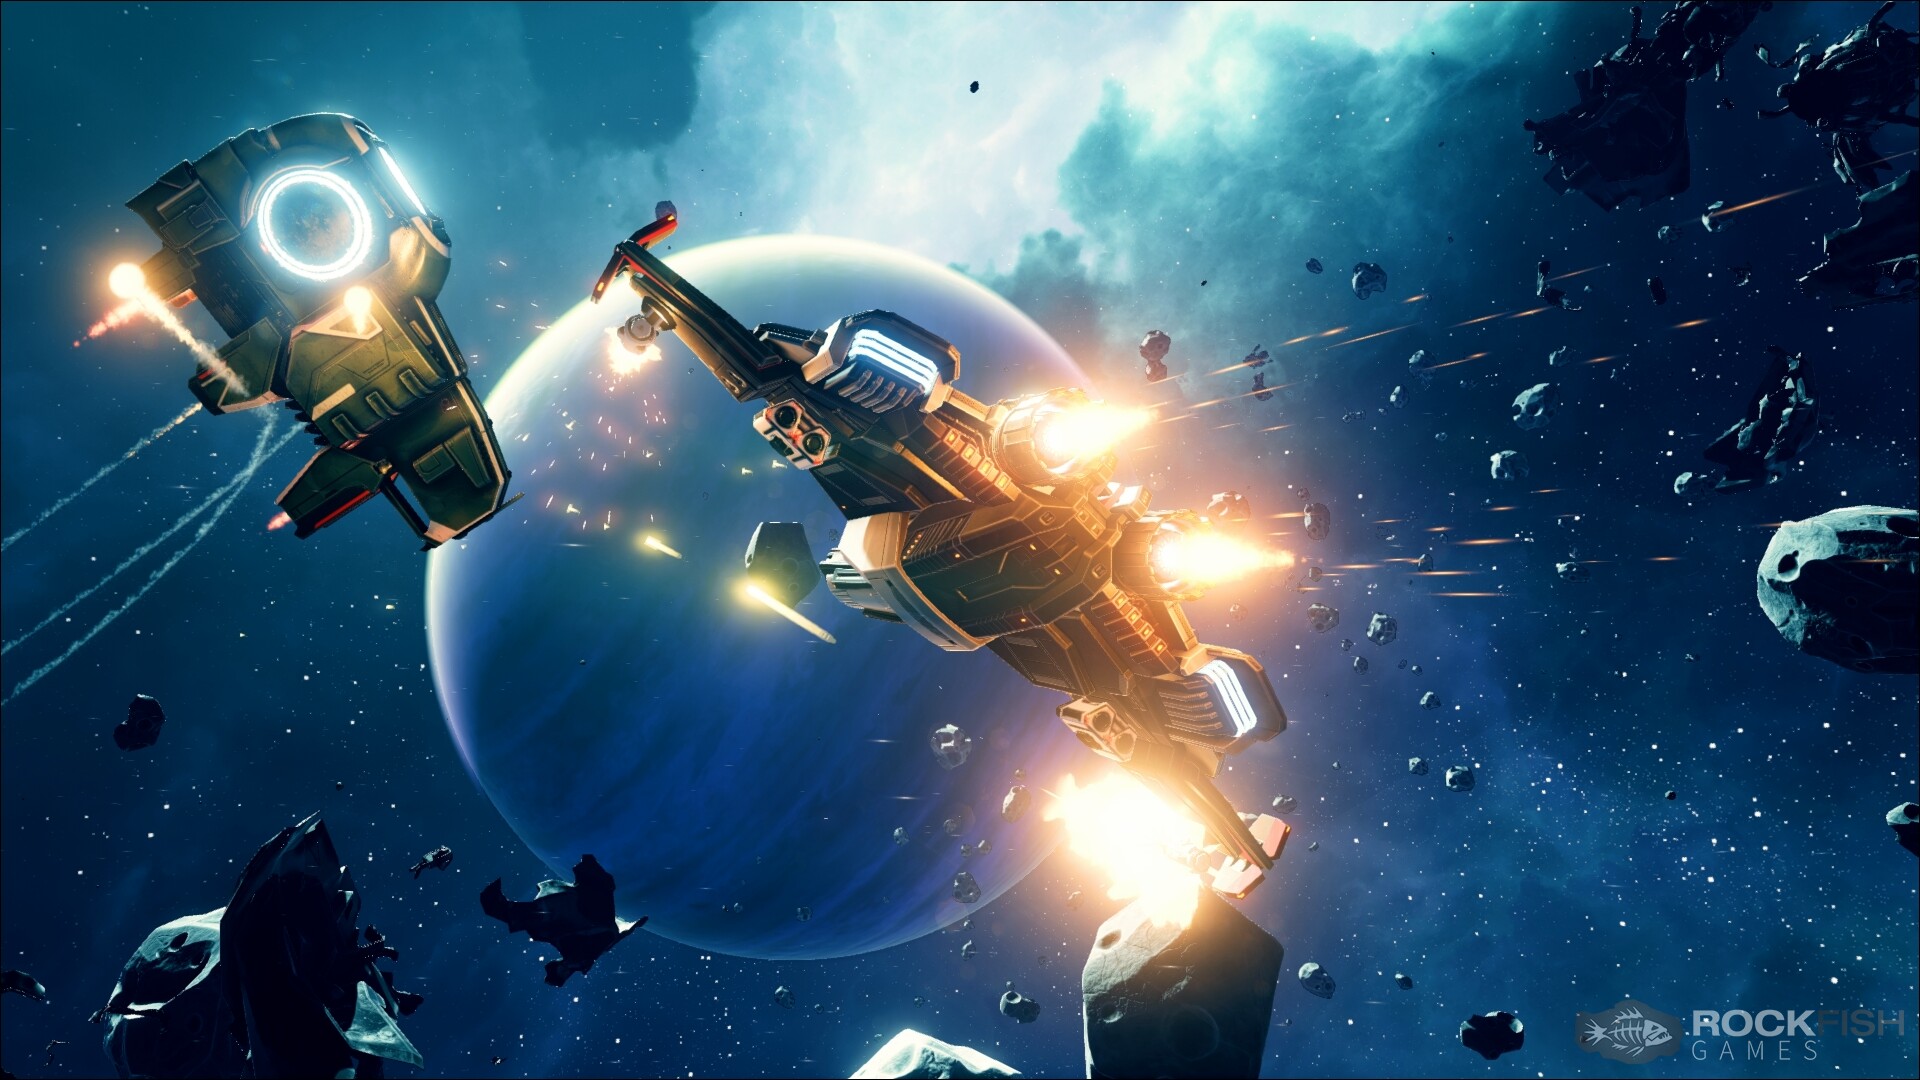 Everspace 2 delivers a handcrafted universe brimming with space combat -  Unreal Engine